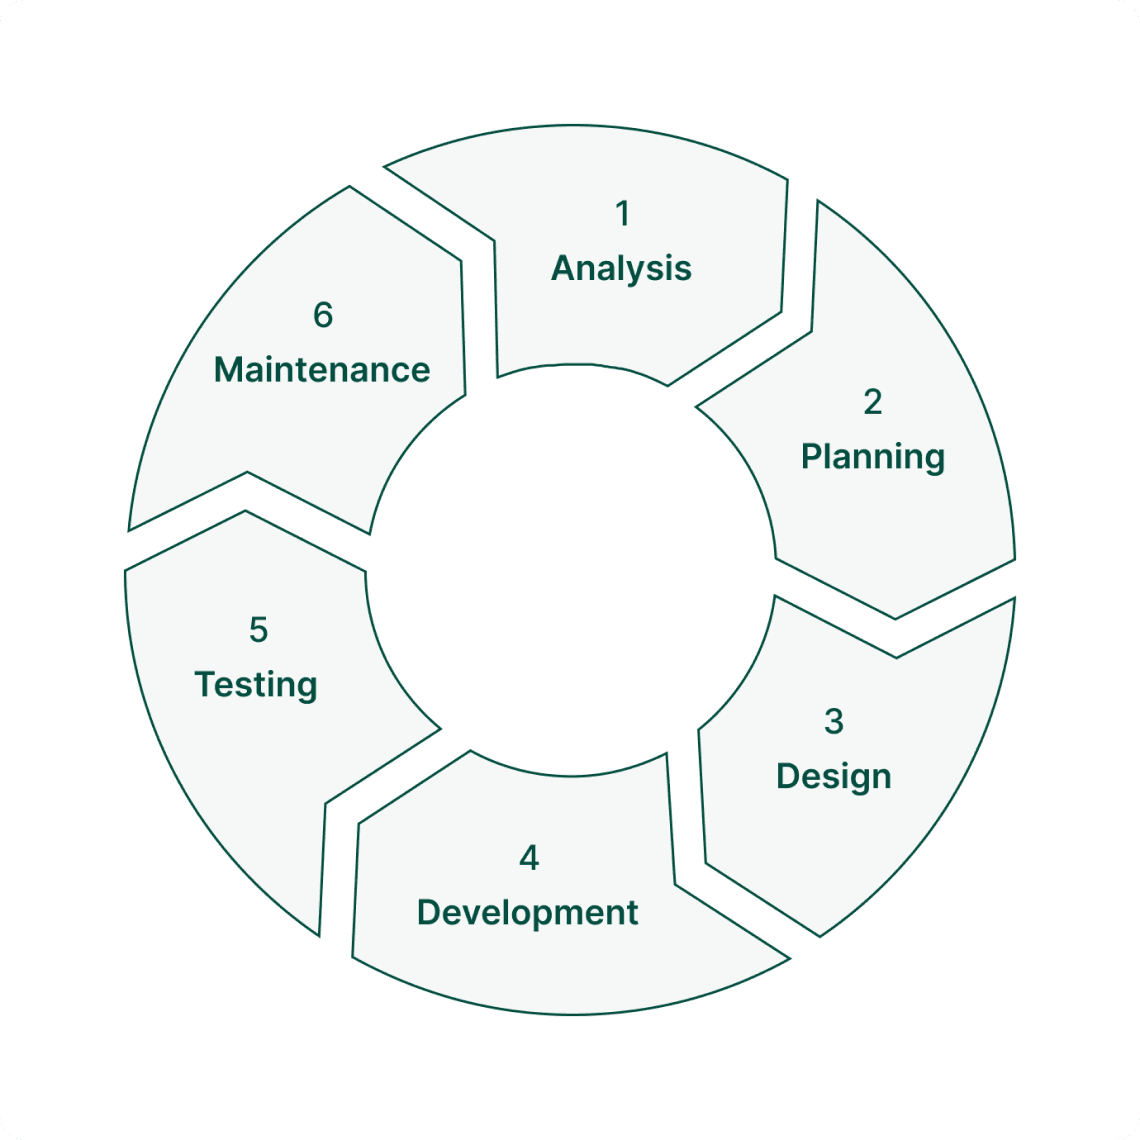 Main Phases of Agilie Software Development Life Cycle